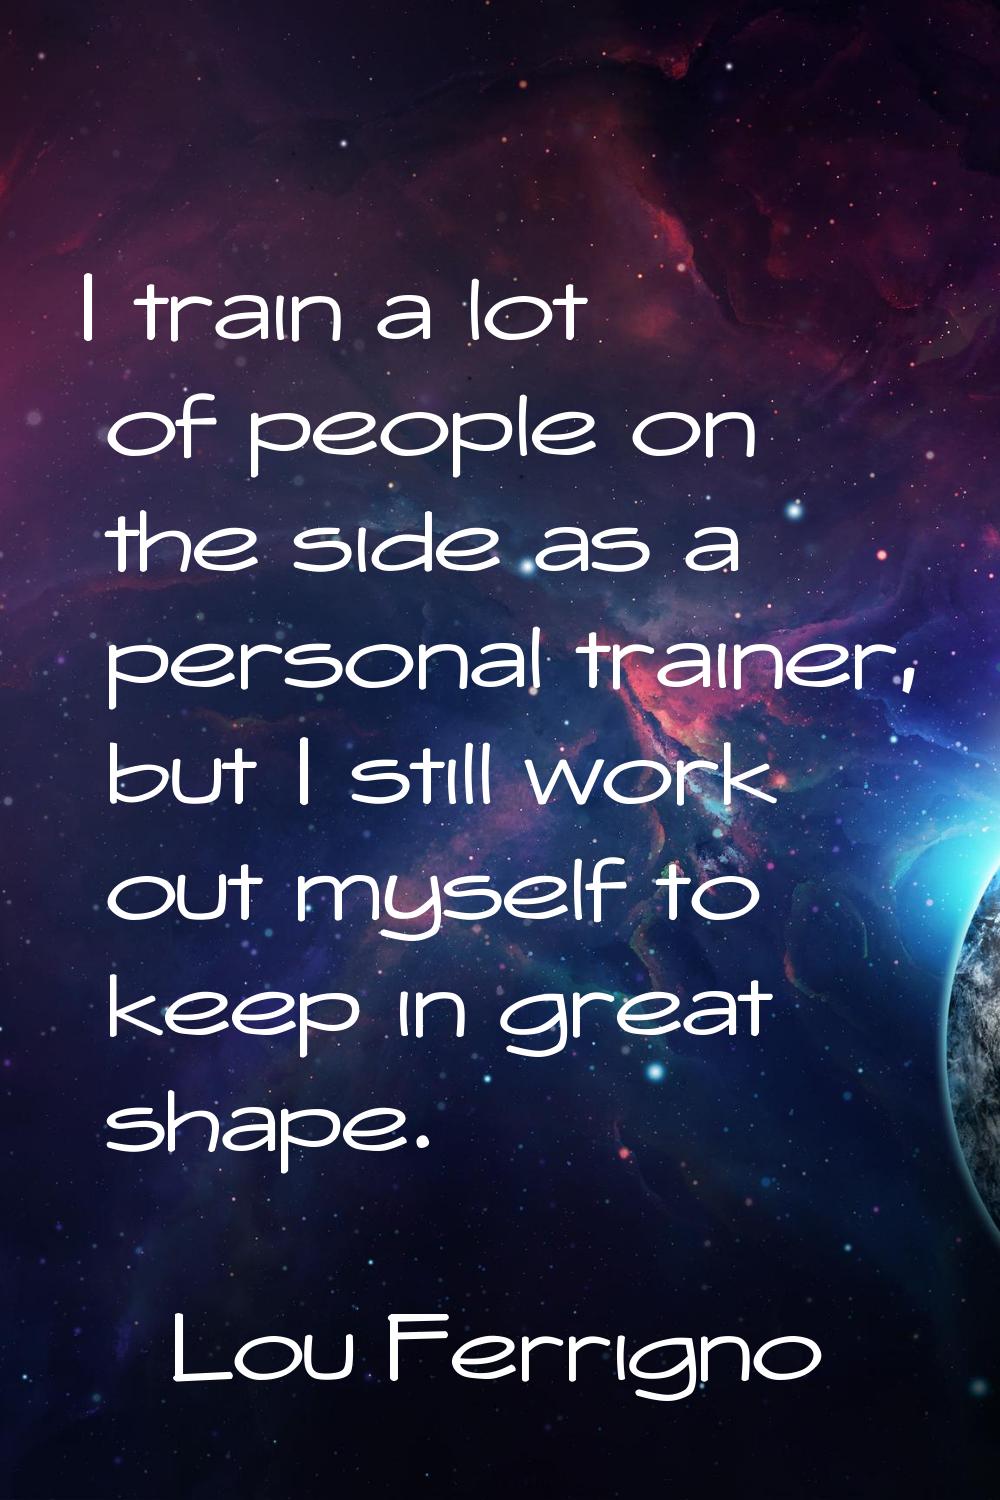 I train a lot of people on the side as a personal trainer, but I still work out myself to keep in g